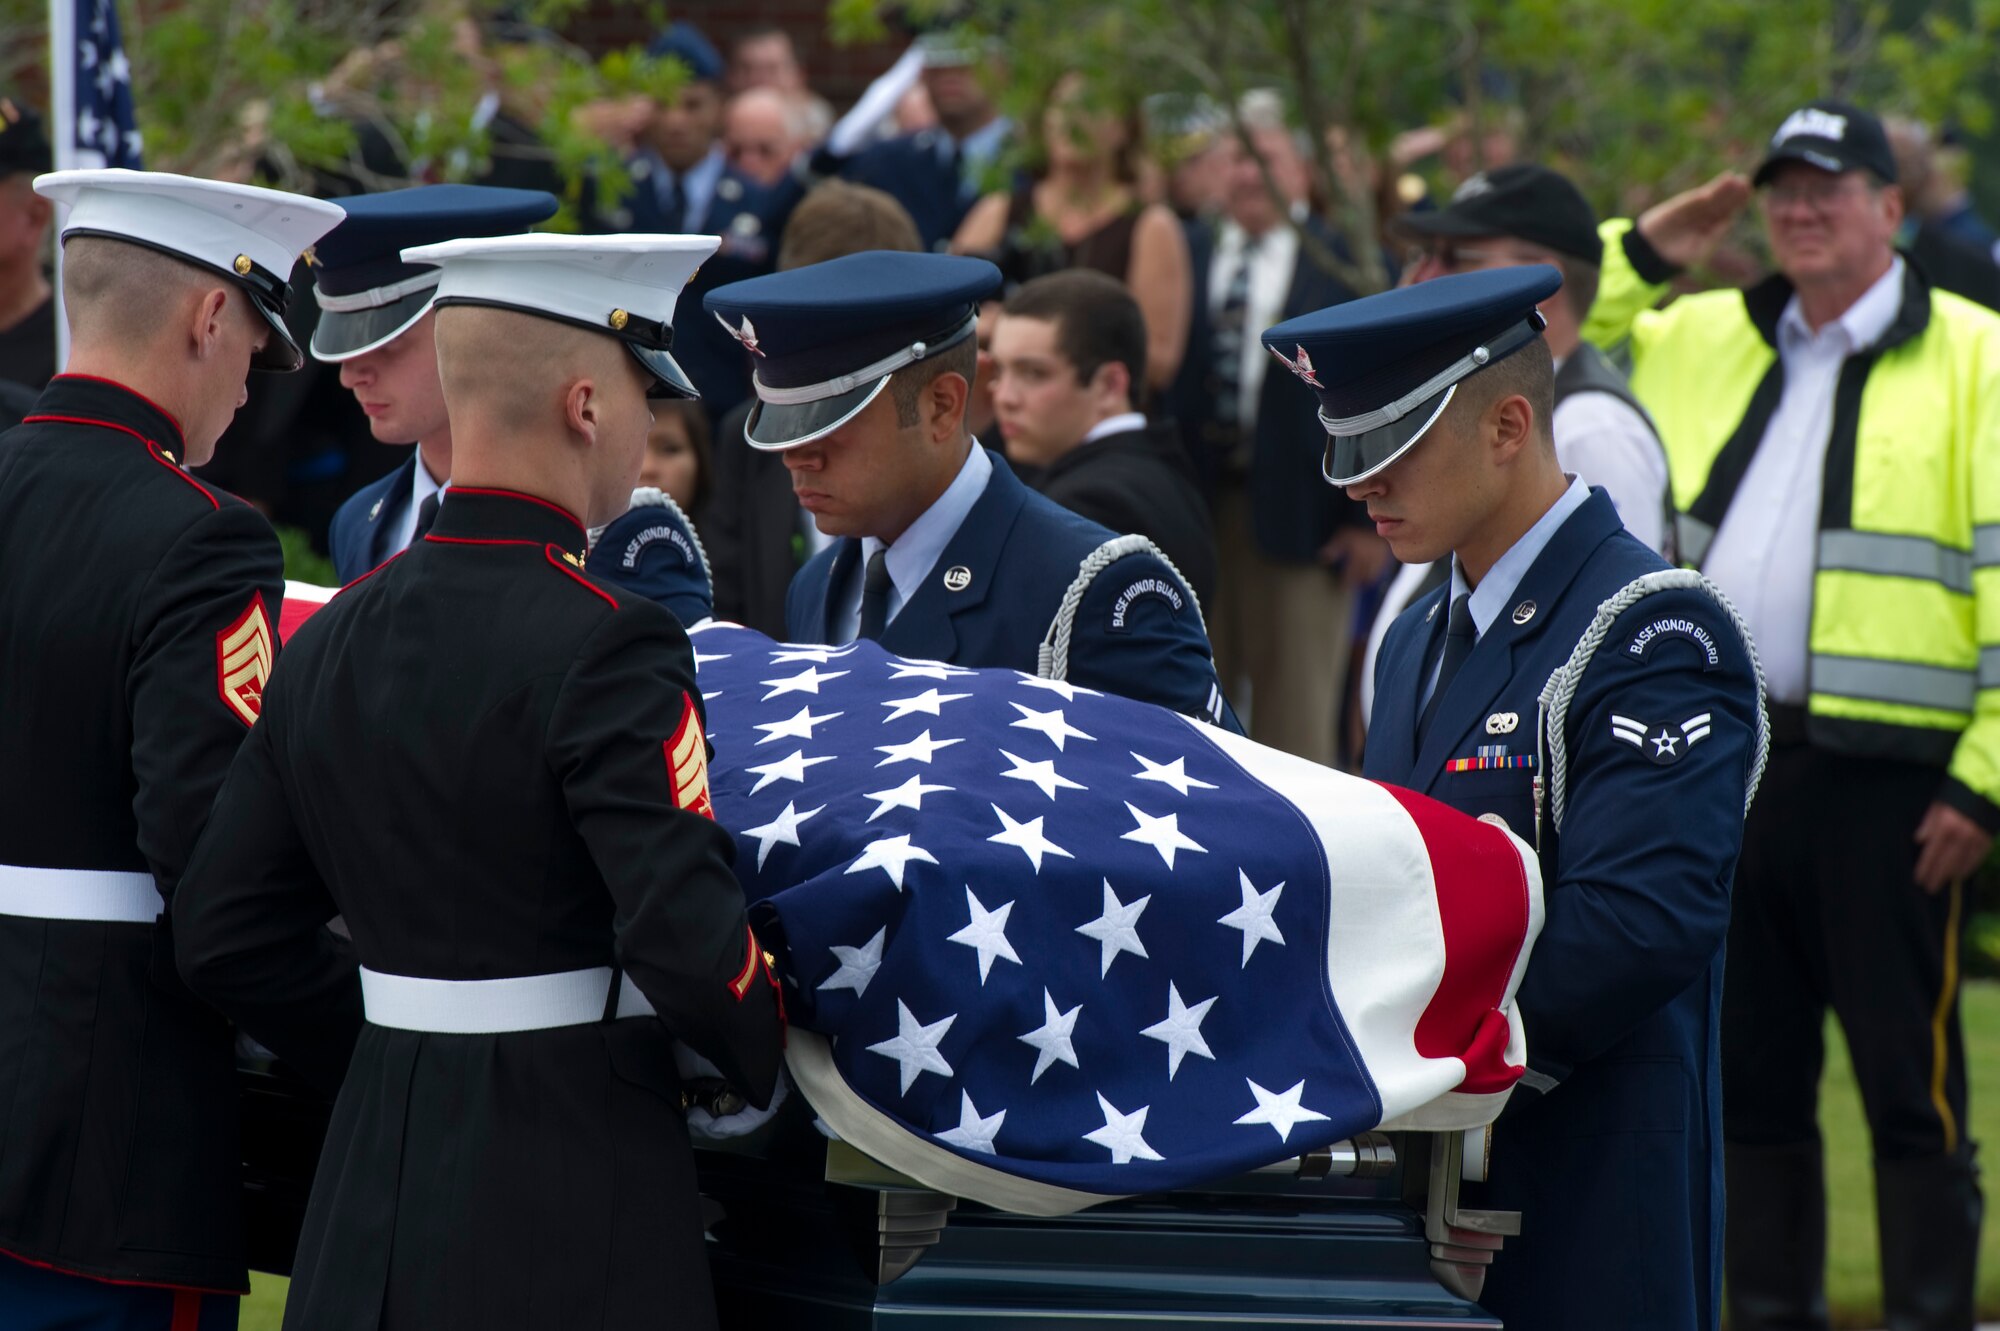 Pallbearers, made up of Airmen and Marines, carry the casket of retired U.S. Air Force Col. George “Bud” Day during his funeral service at Barrancas National Cemetery on Naval Air Station Pensacola, Fla., Aug. 1, 2013. Day, a Medal of Honor recipient and combat pilot with service in World War II, Korea and Vietnam, passed away July 28 at the age of 88. (U.S. Air Force Photo/Staff Sgt. John Bainter))